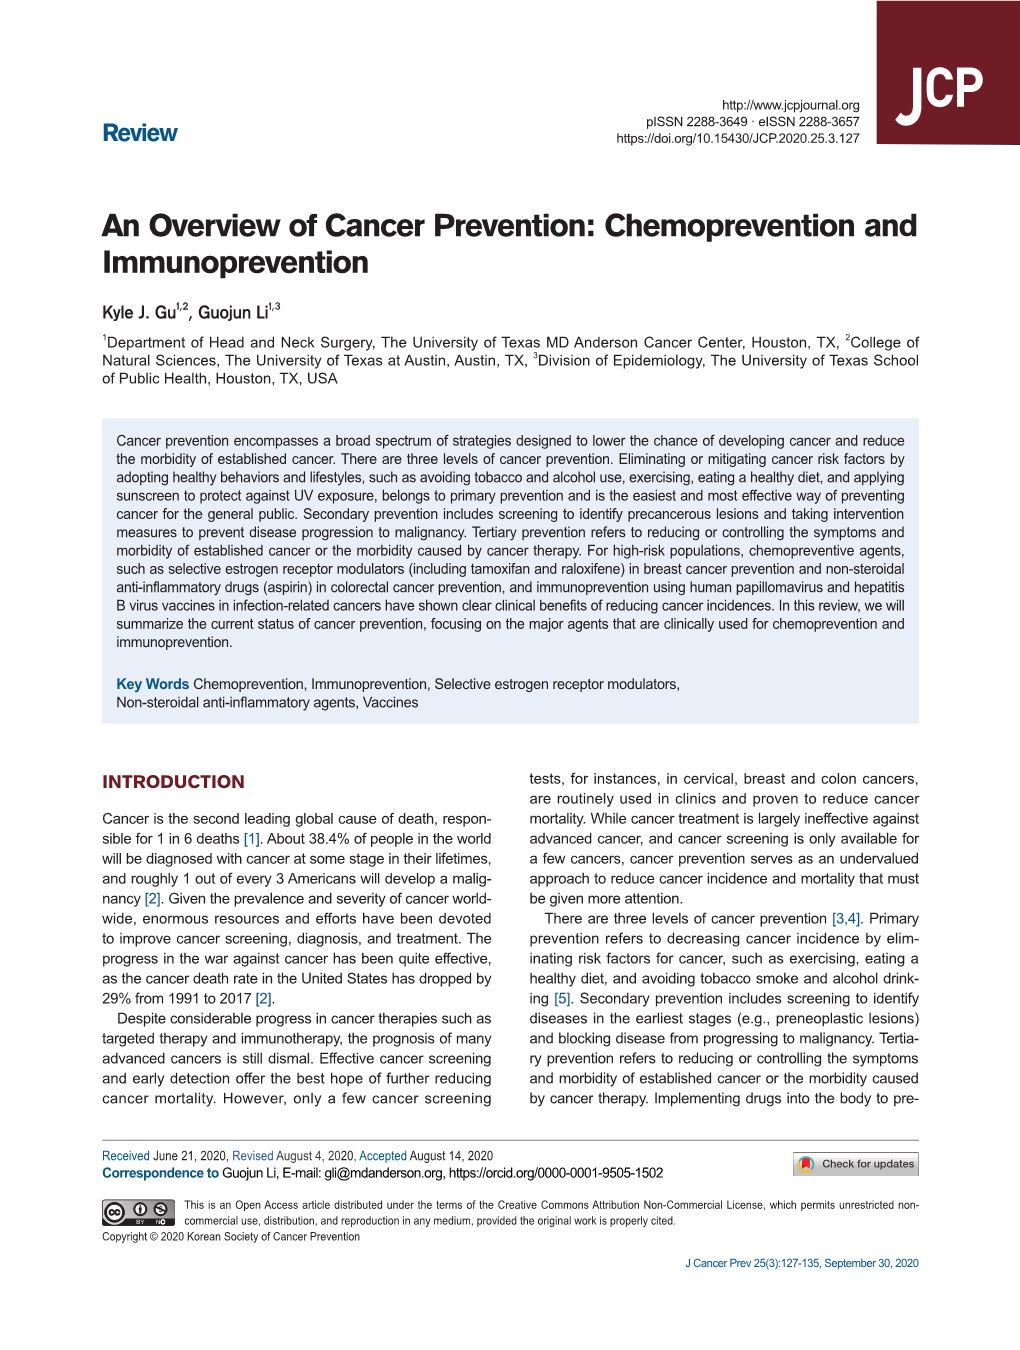 An Overview of Cancer Prevention: Chemoprevention and Immunoprevention